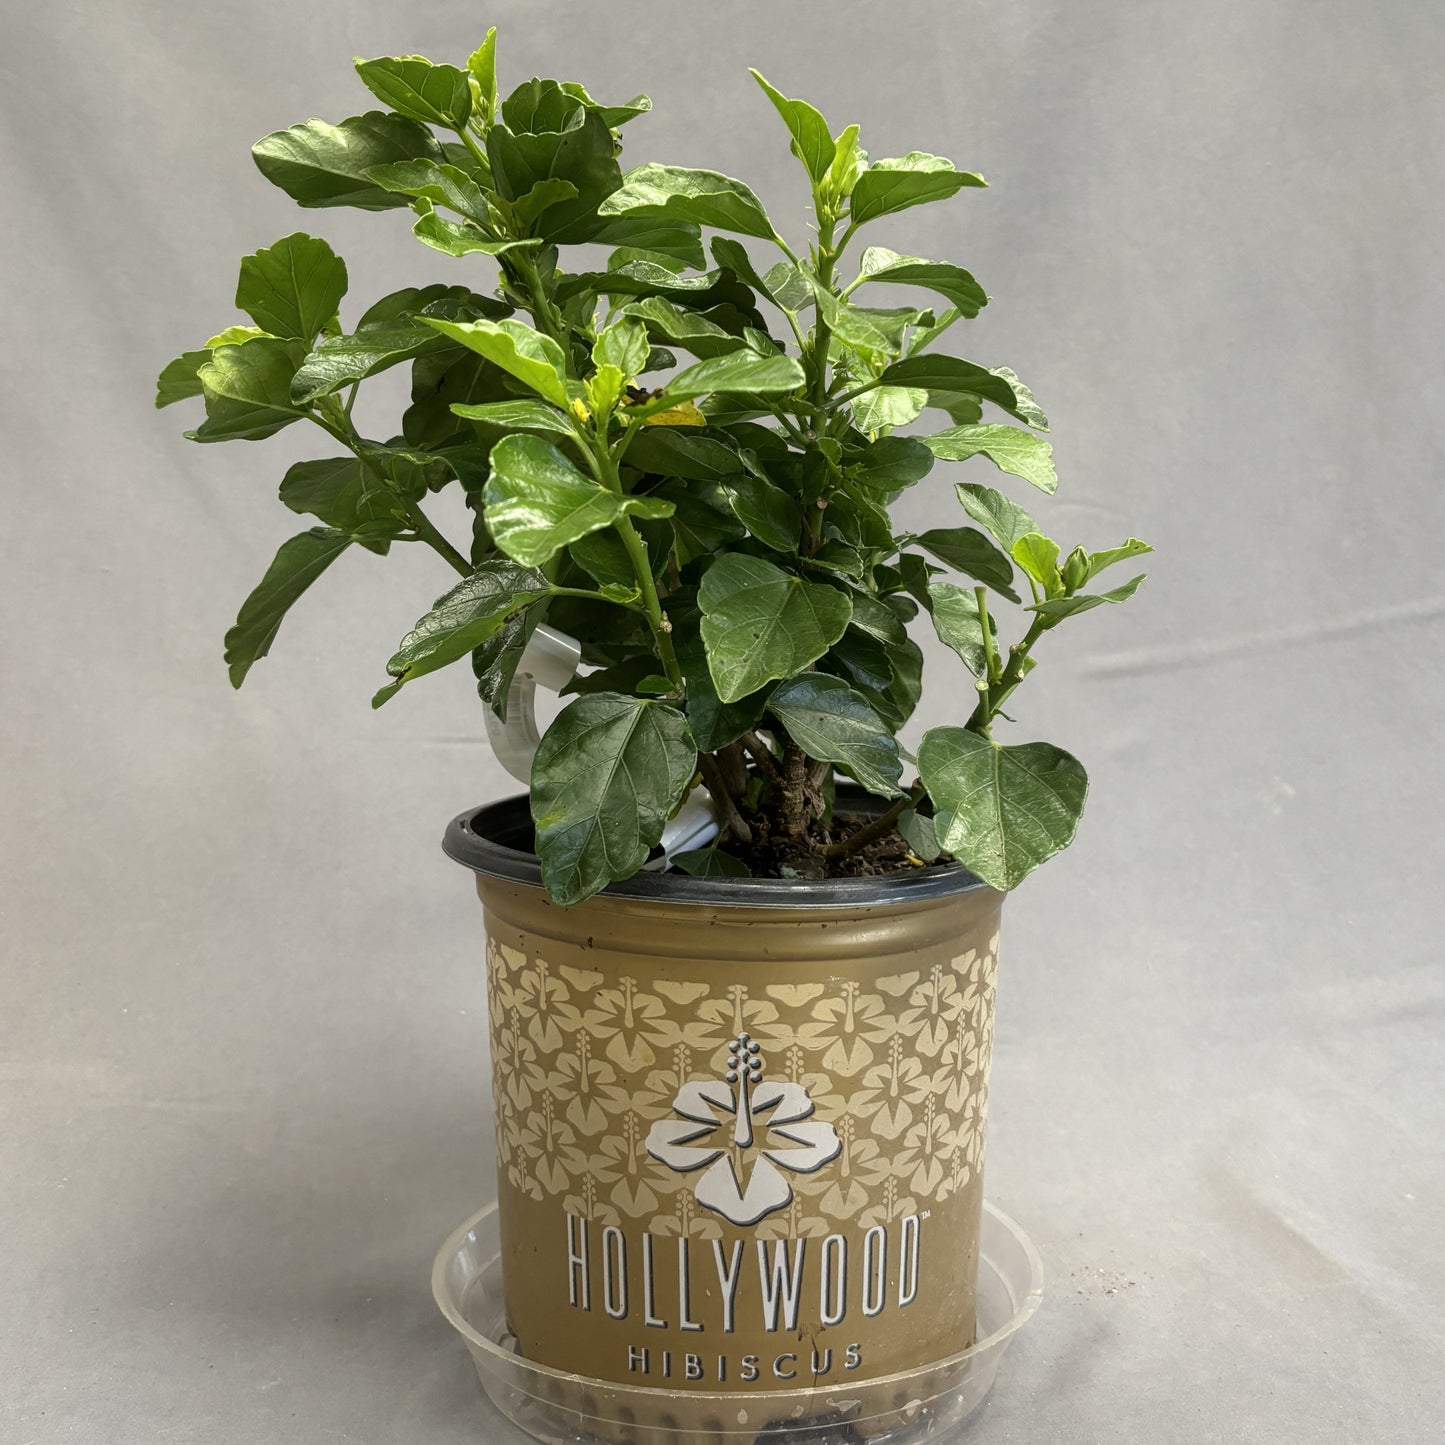 Hollywood Hibiscus Assorted 8" Pot